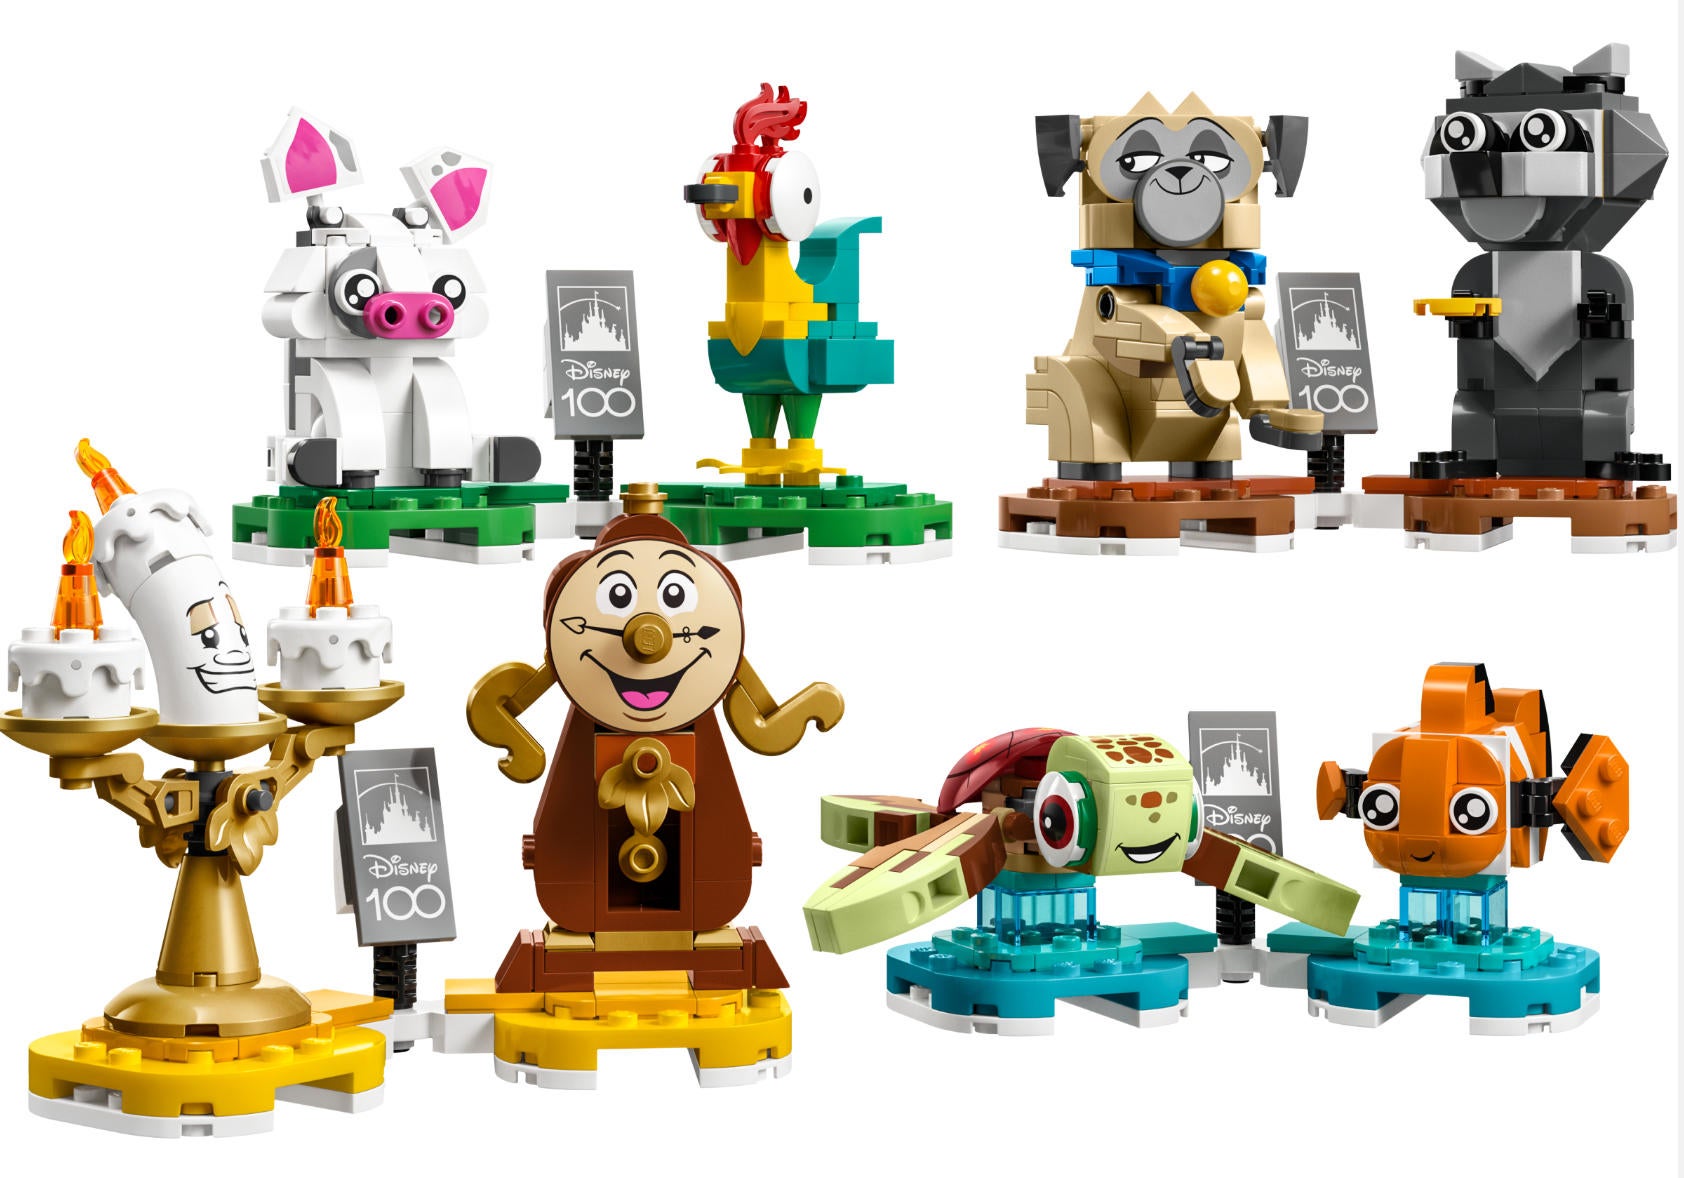 Disney 100 LEGO Villain Icons and Disney Duos Sets Are Up for Pre